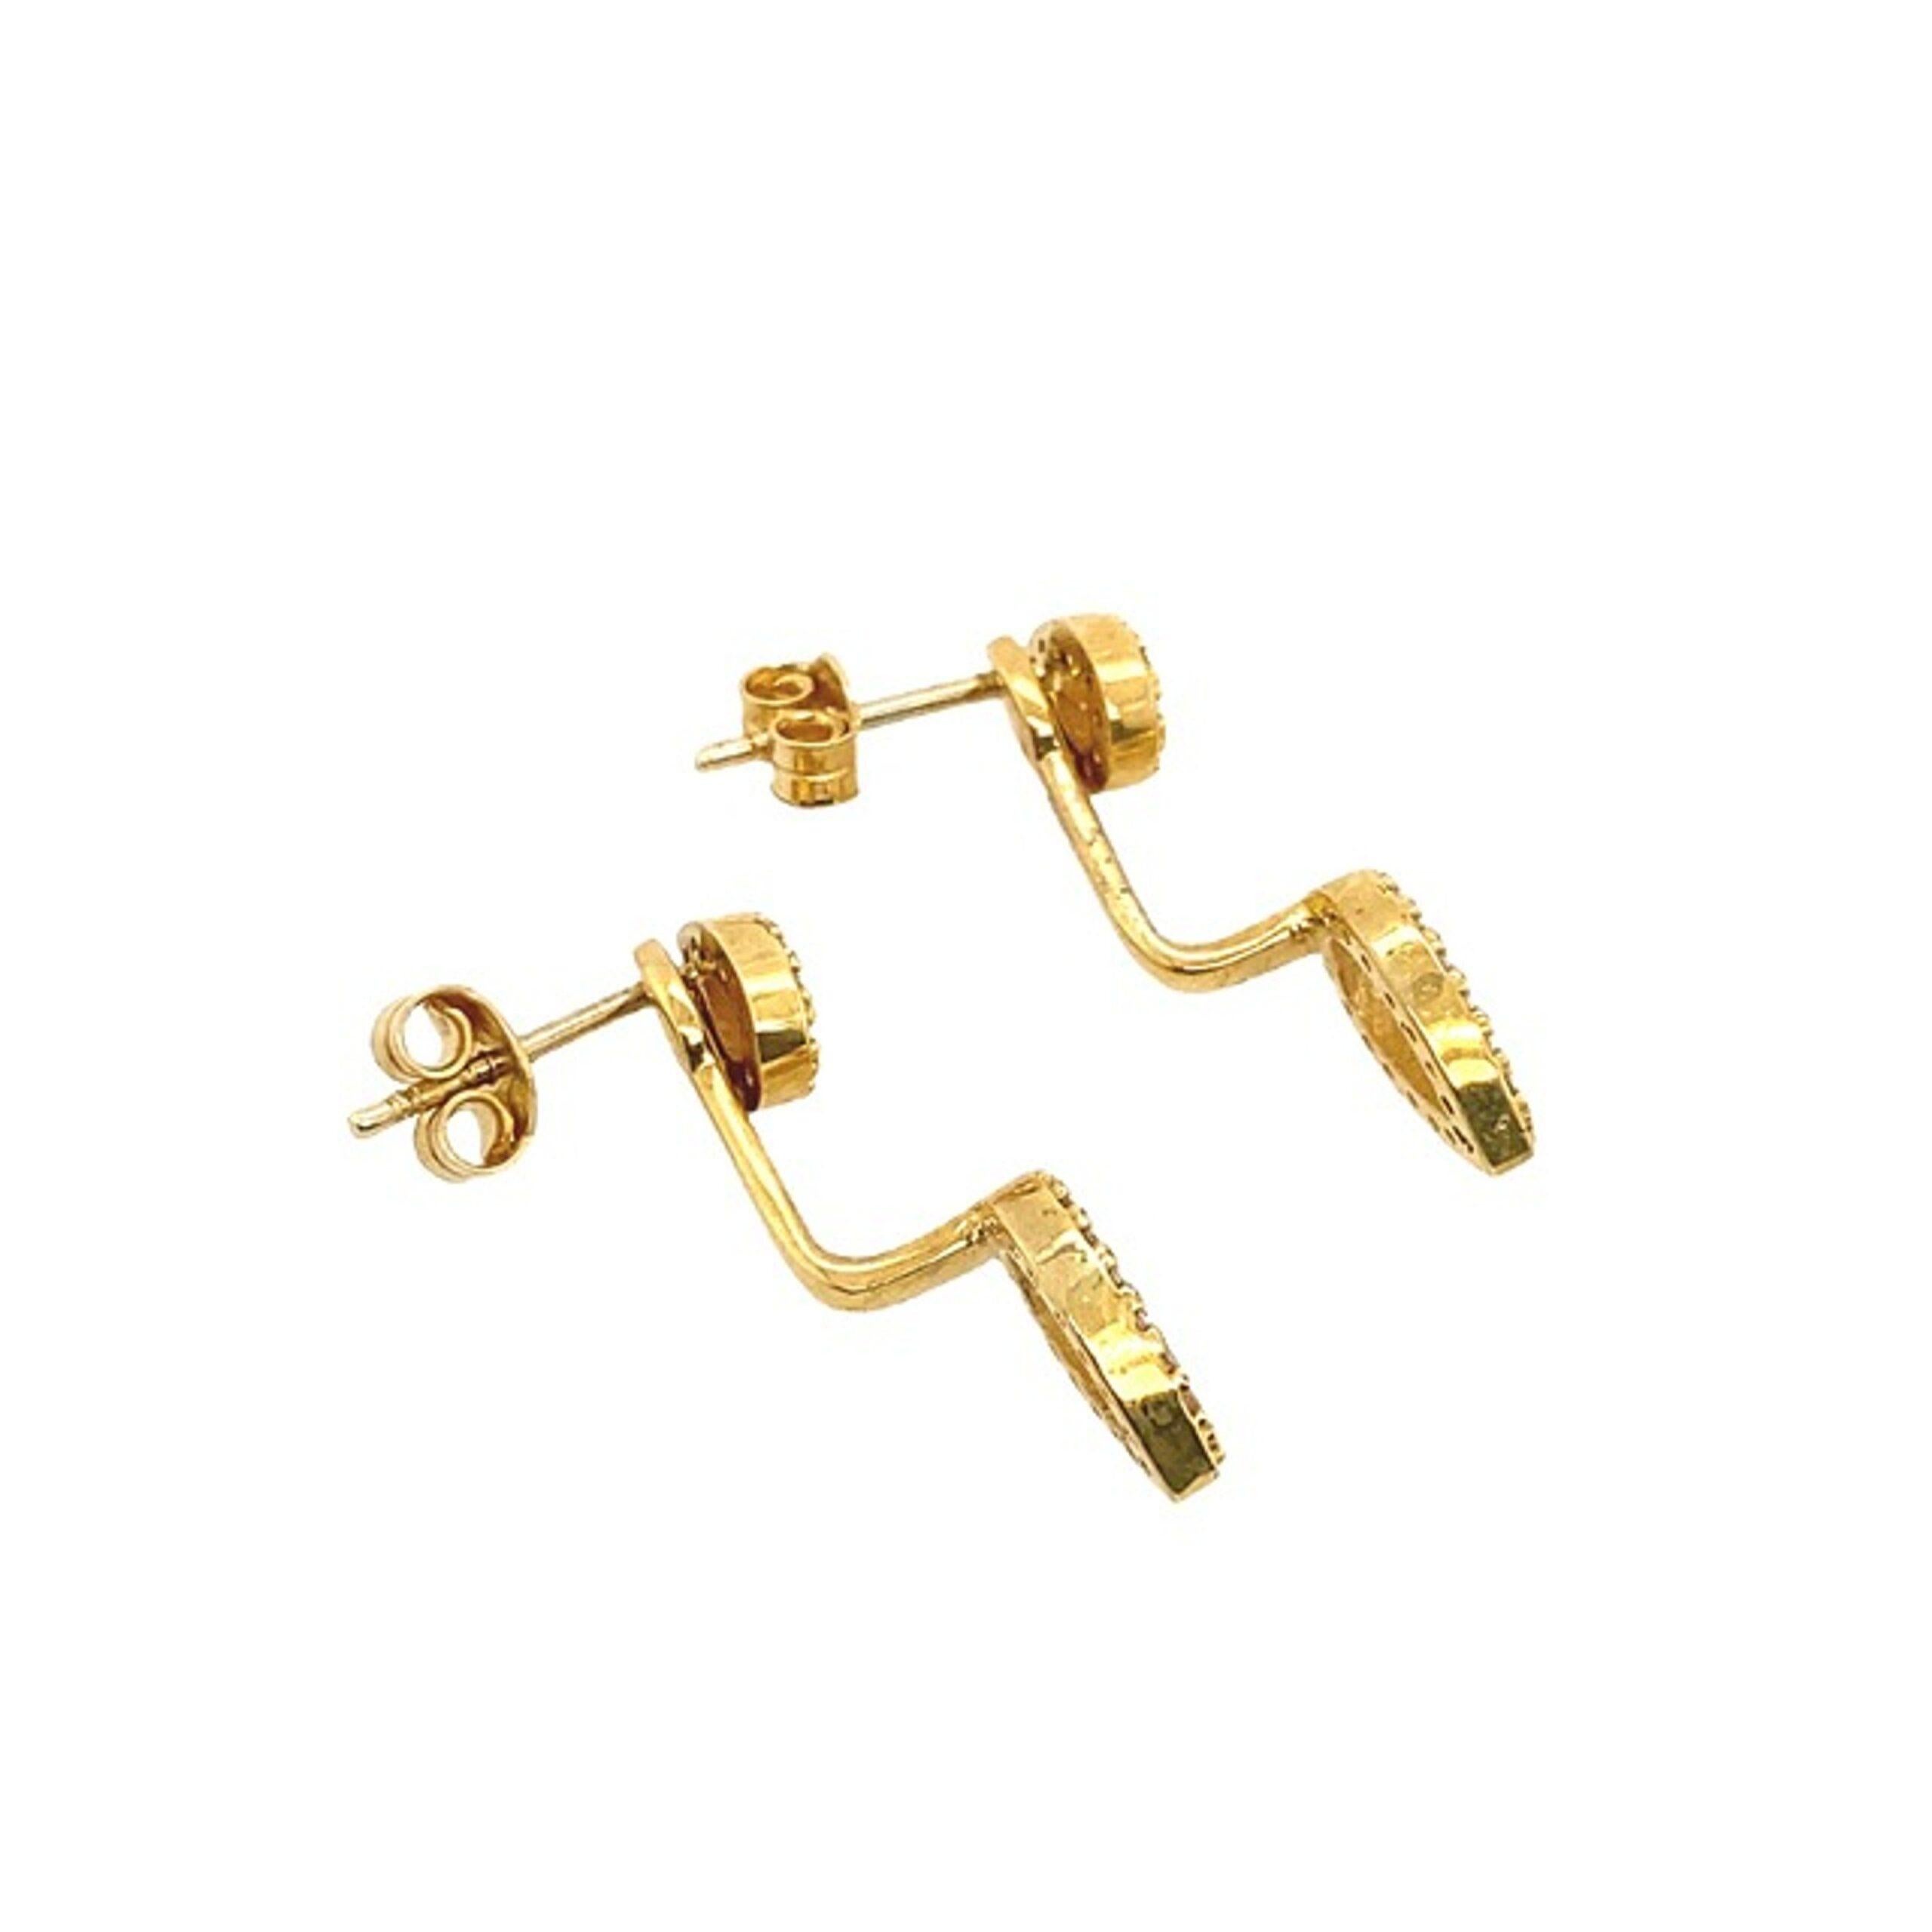 New Fine Quality Drops & Studs Earrings Set with Diamonds in 18ct Yellow Gold

This beautiful pair of earrings is made of 18ctYellow Gold. It is set with 0.50ct of round brilliant cut Diamonds. They are elegant and timeless, the perfect gift for any